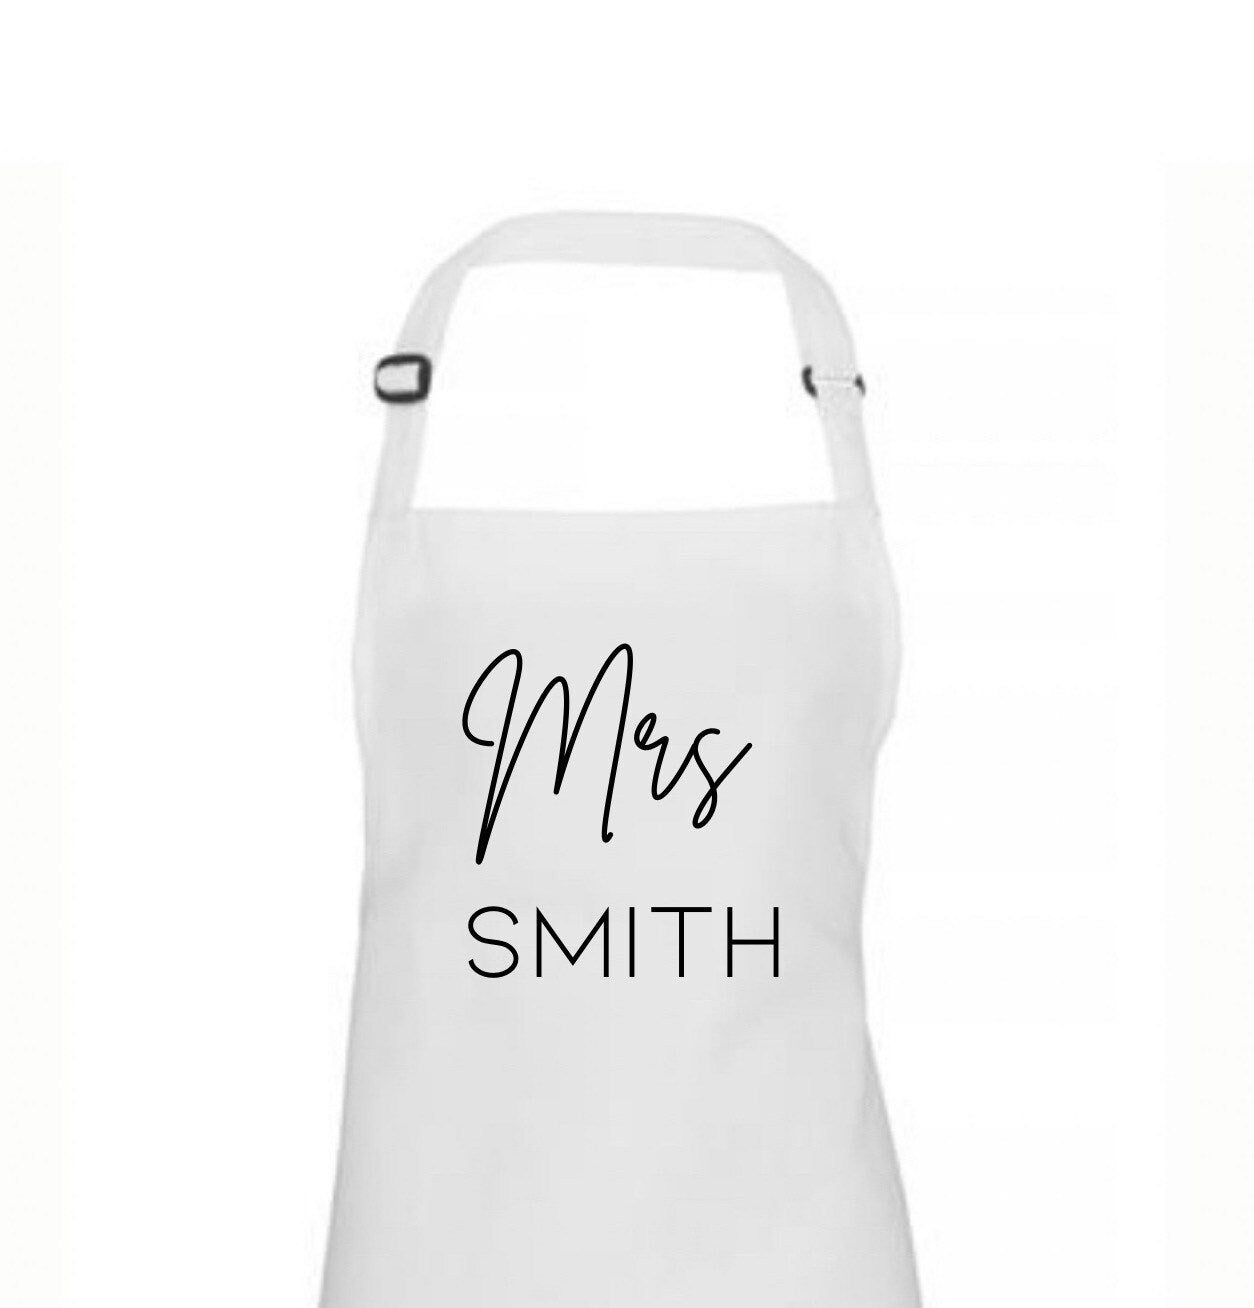 Wedding Day Apron, Personalised White Apron for Bride, Apron for First meal as Mr & Mrs, Wedding Dress Cover and Matching Tote Bag